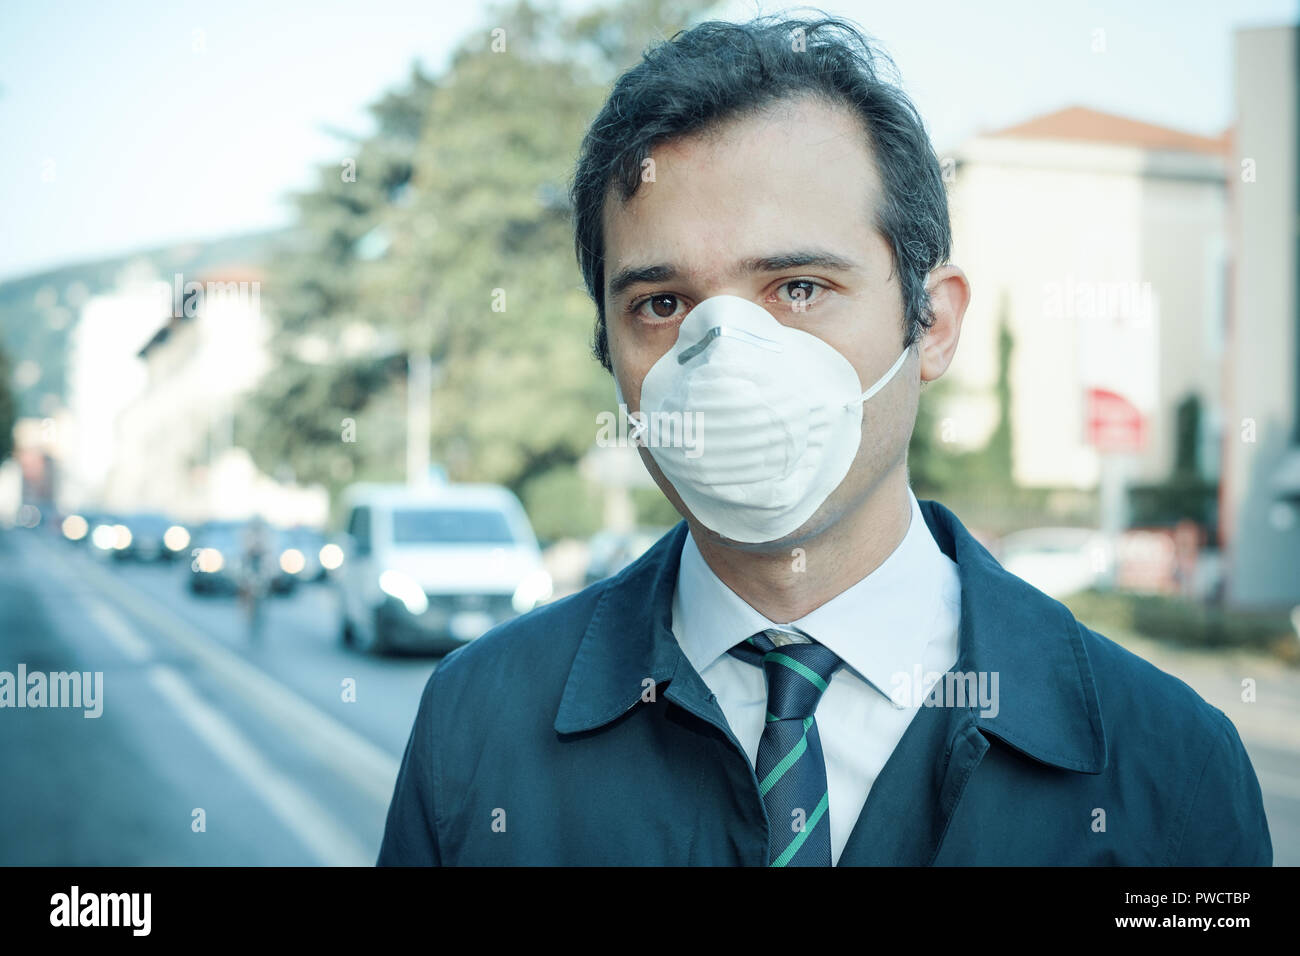 Man wearing mask against smog air pollution Stock Photo